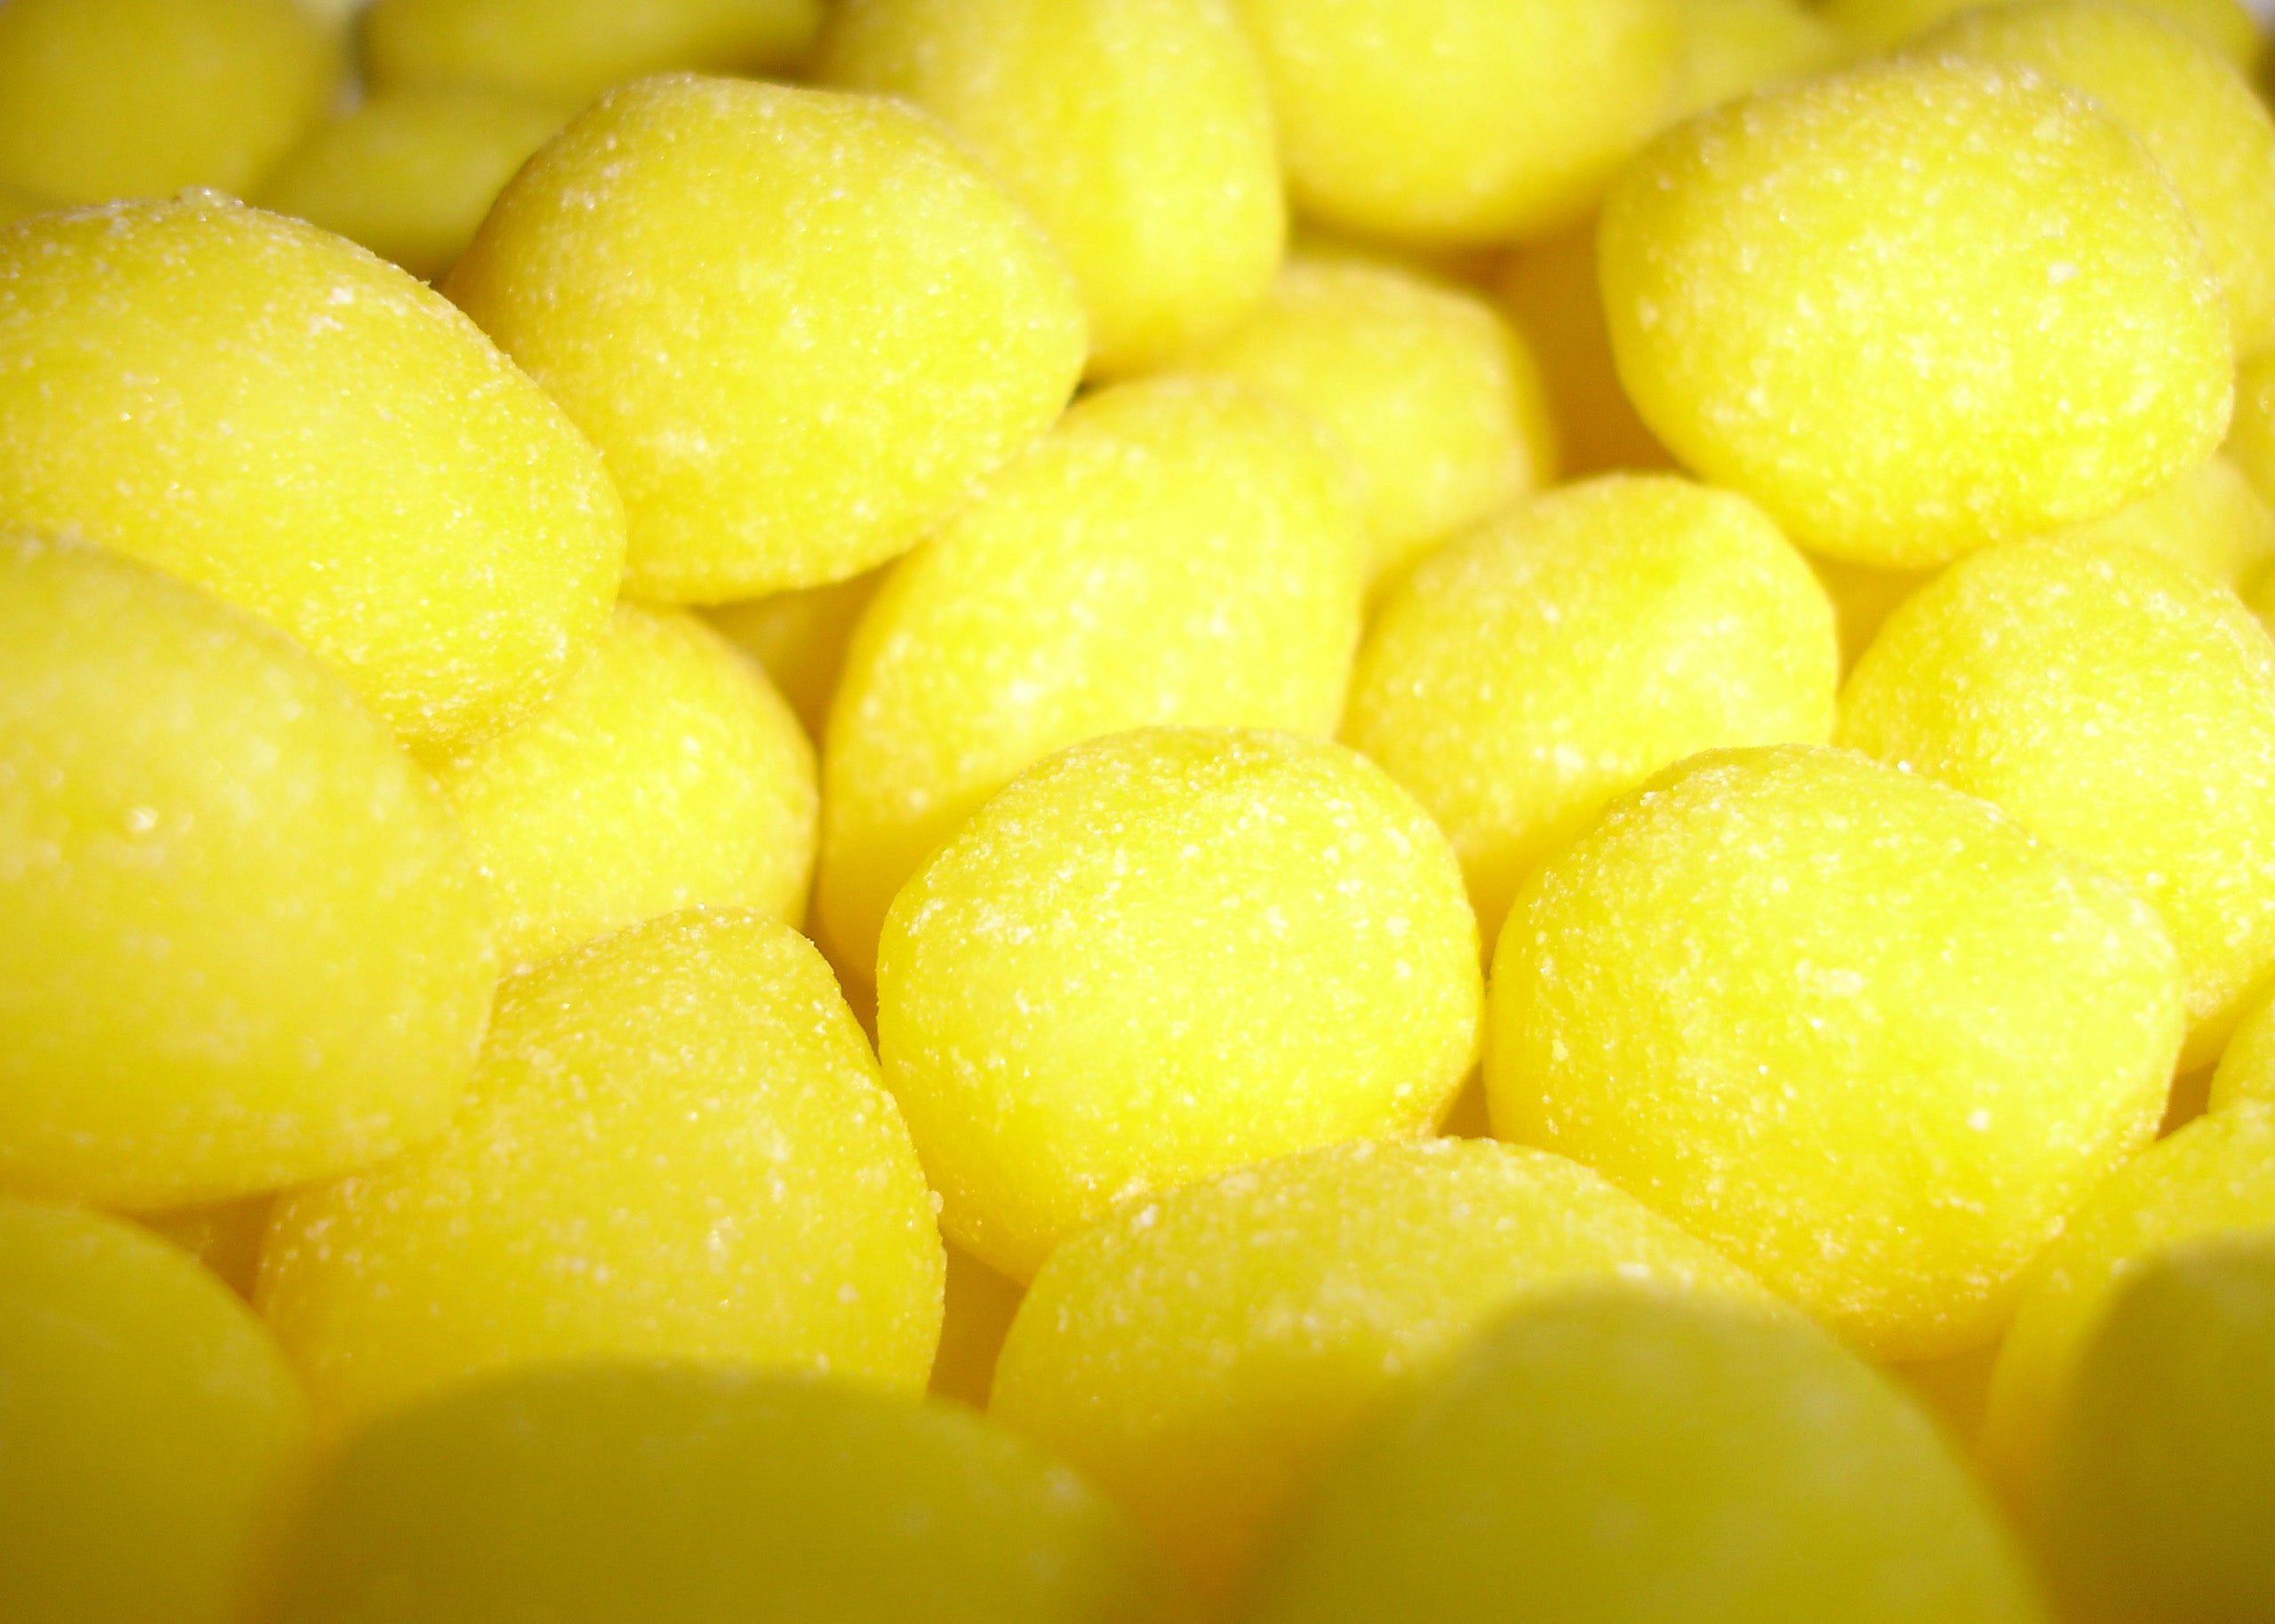 Yellow sweets were harder back in my day